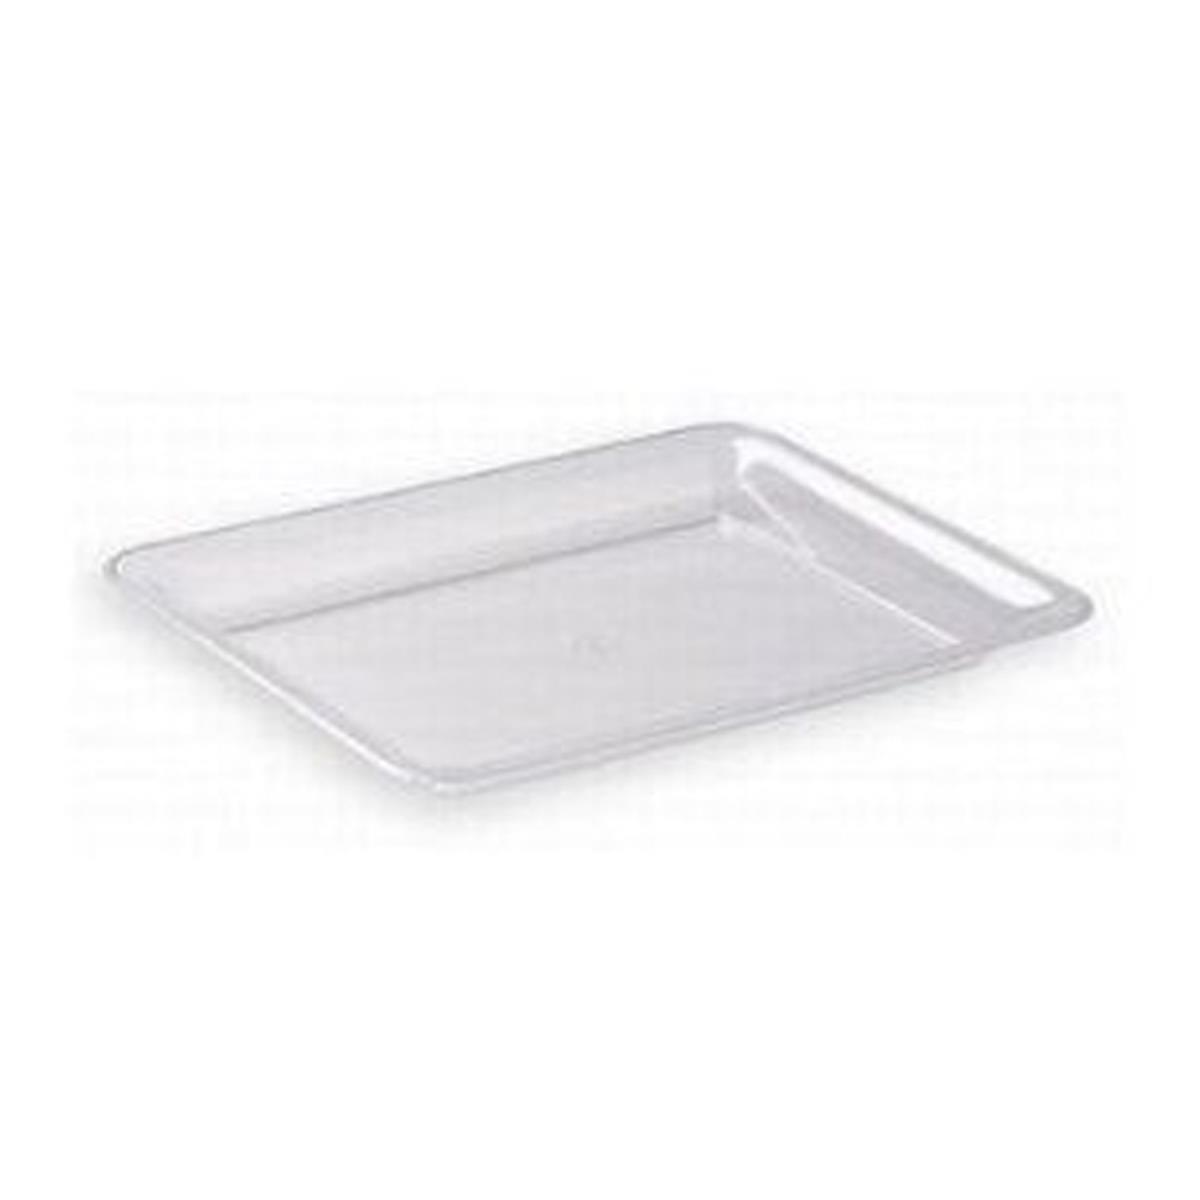 Mpi12186c Pe 12 X 18 In. Clear Sovereign Rectangular Tray - Case Of 20